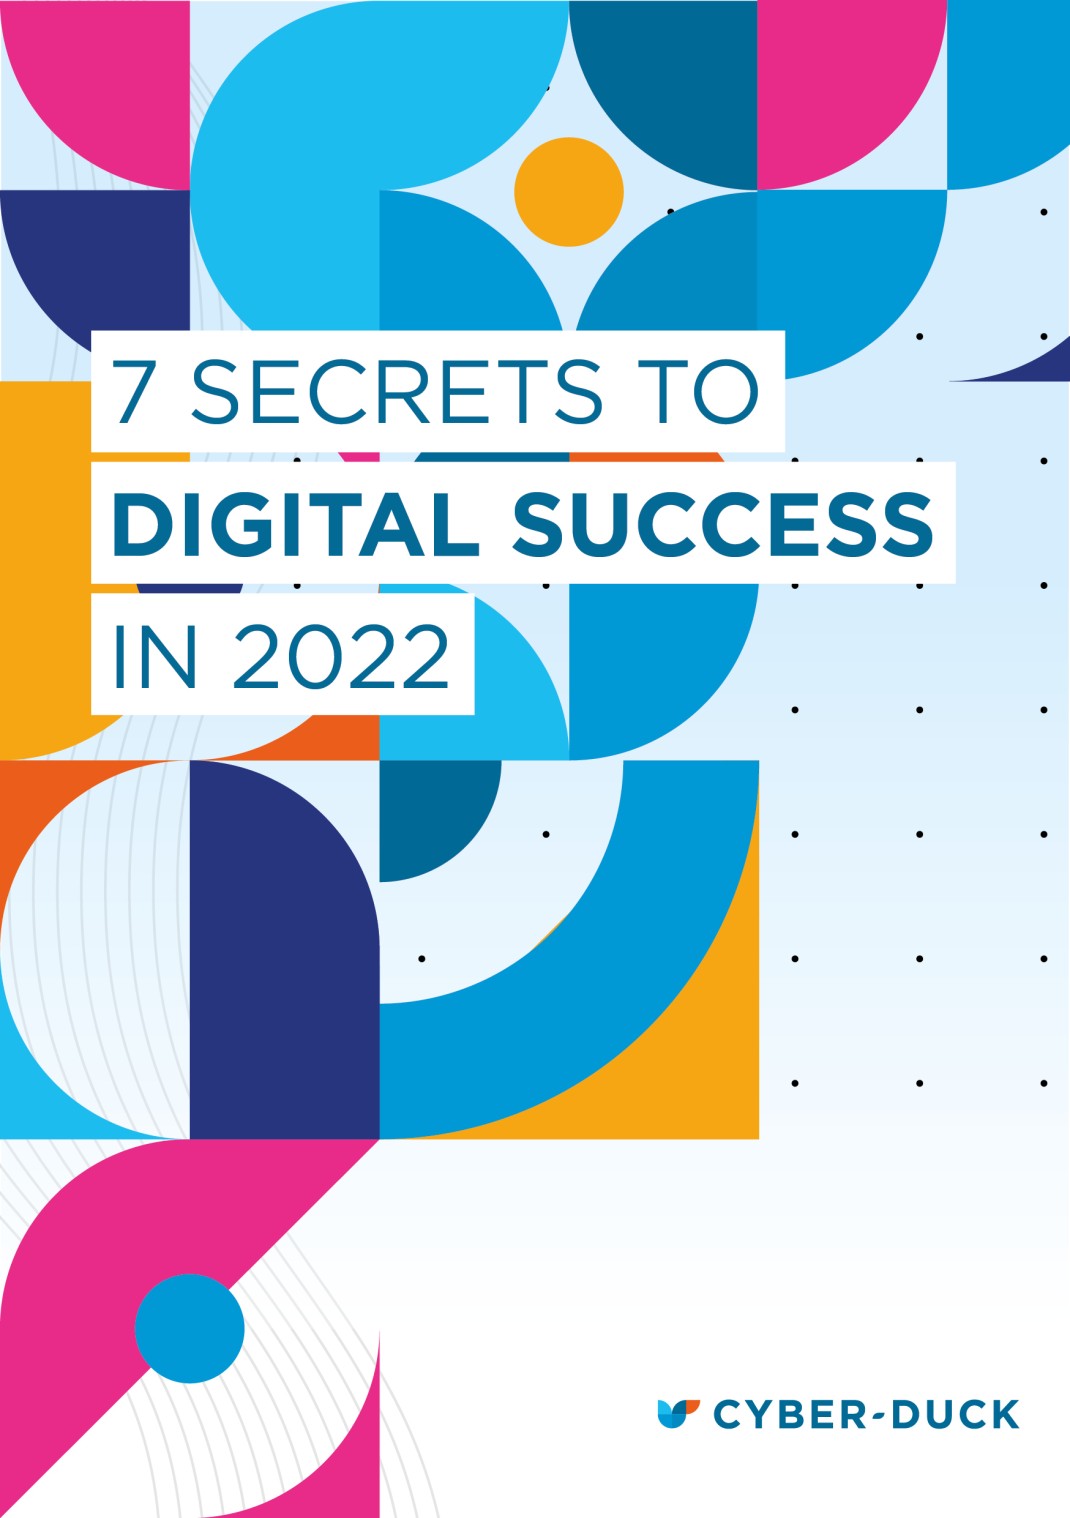 front cover image for 7 secrets to digital success in 2022 white paper